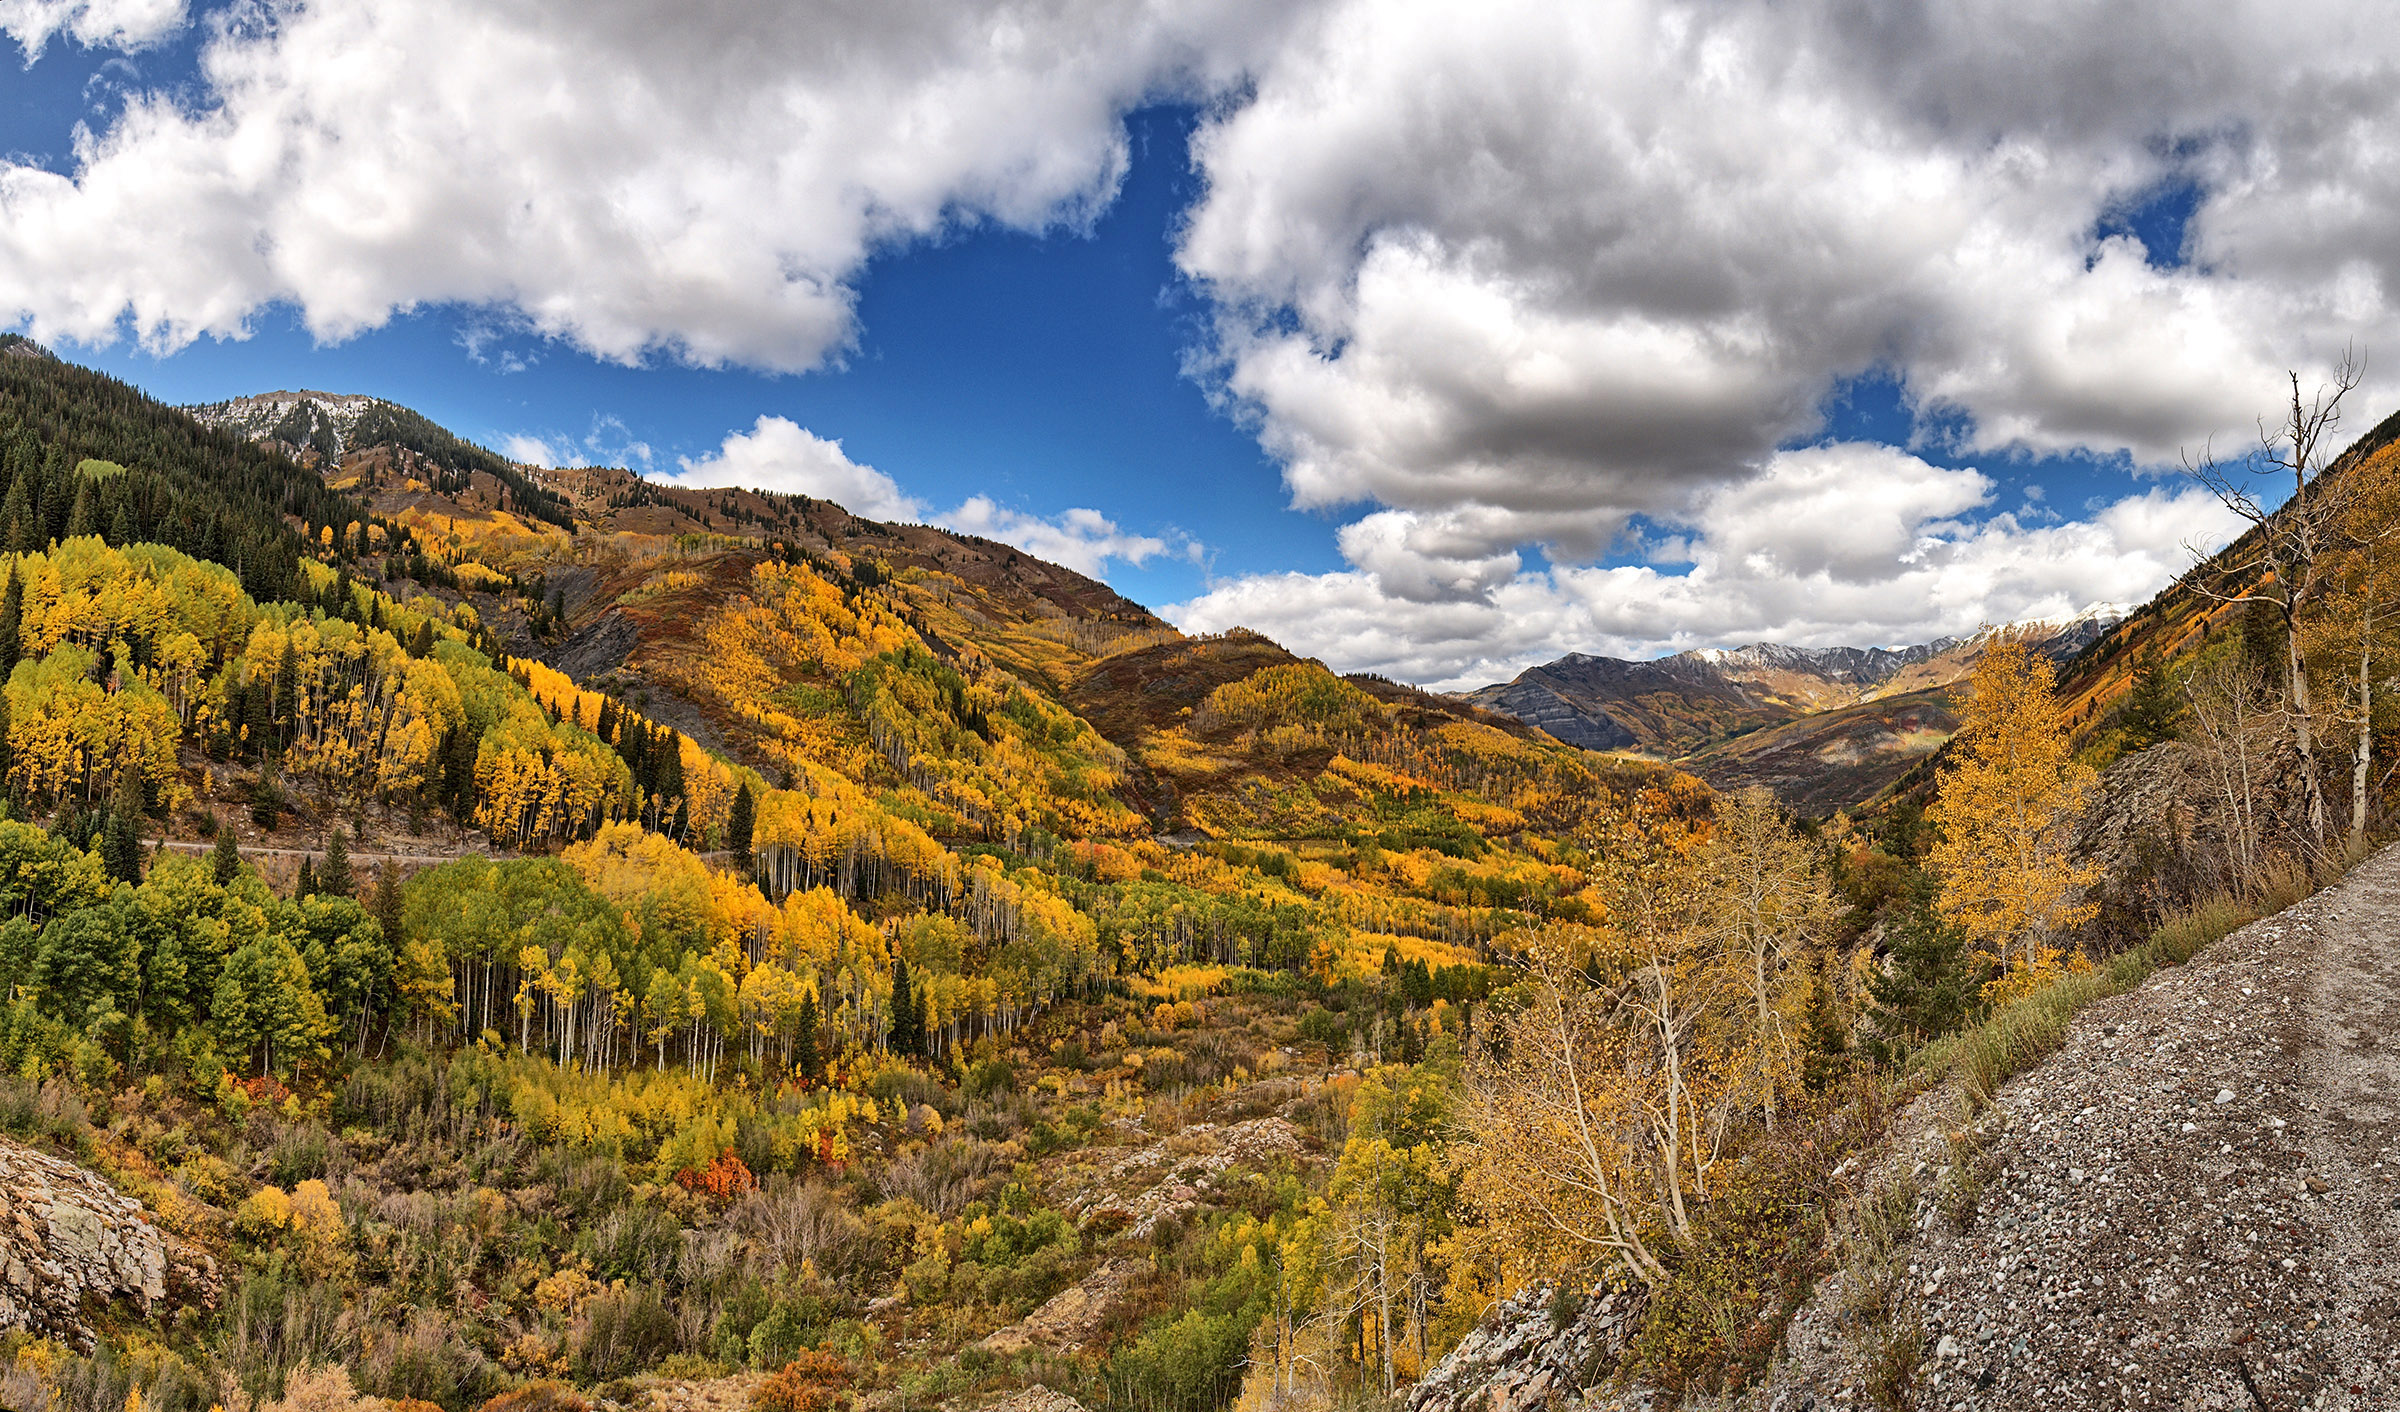 View of Valley and Aspens on County Road 3C near the Yule Marble Quarry.